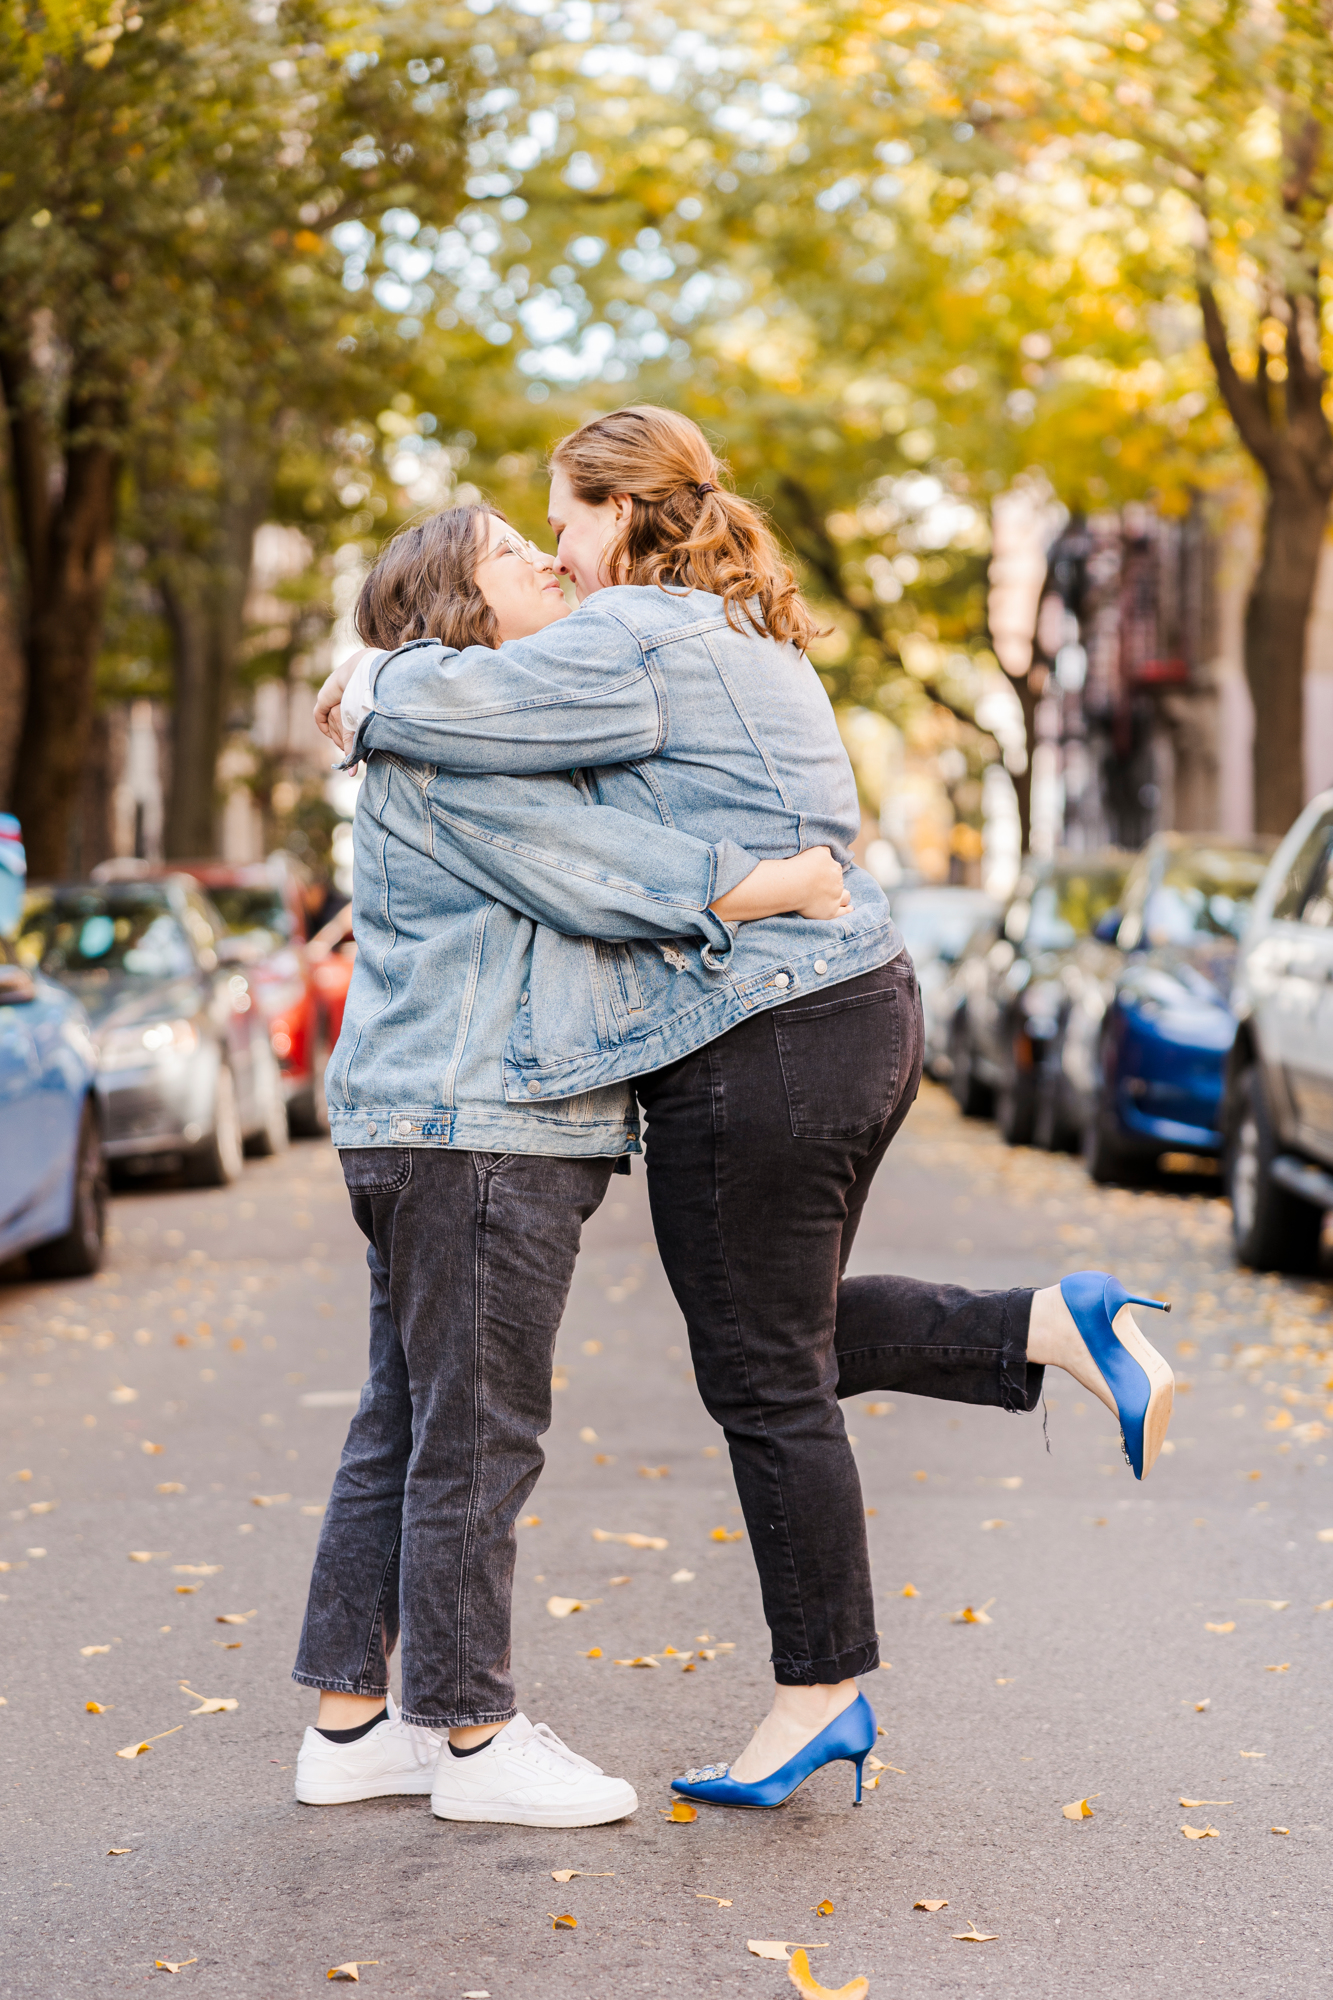 Special New York engagement photography